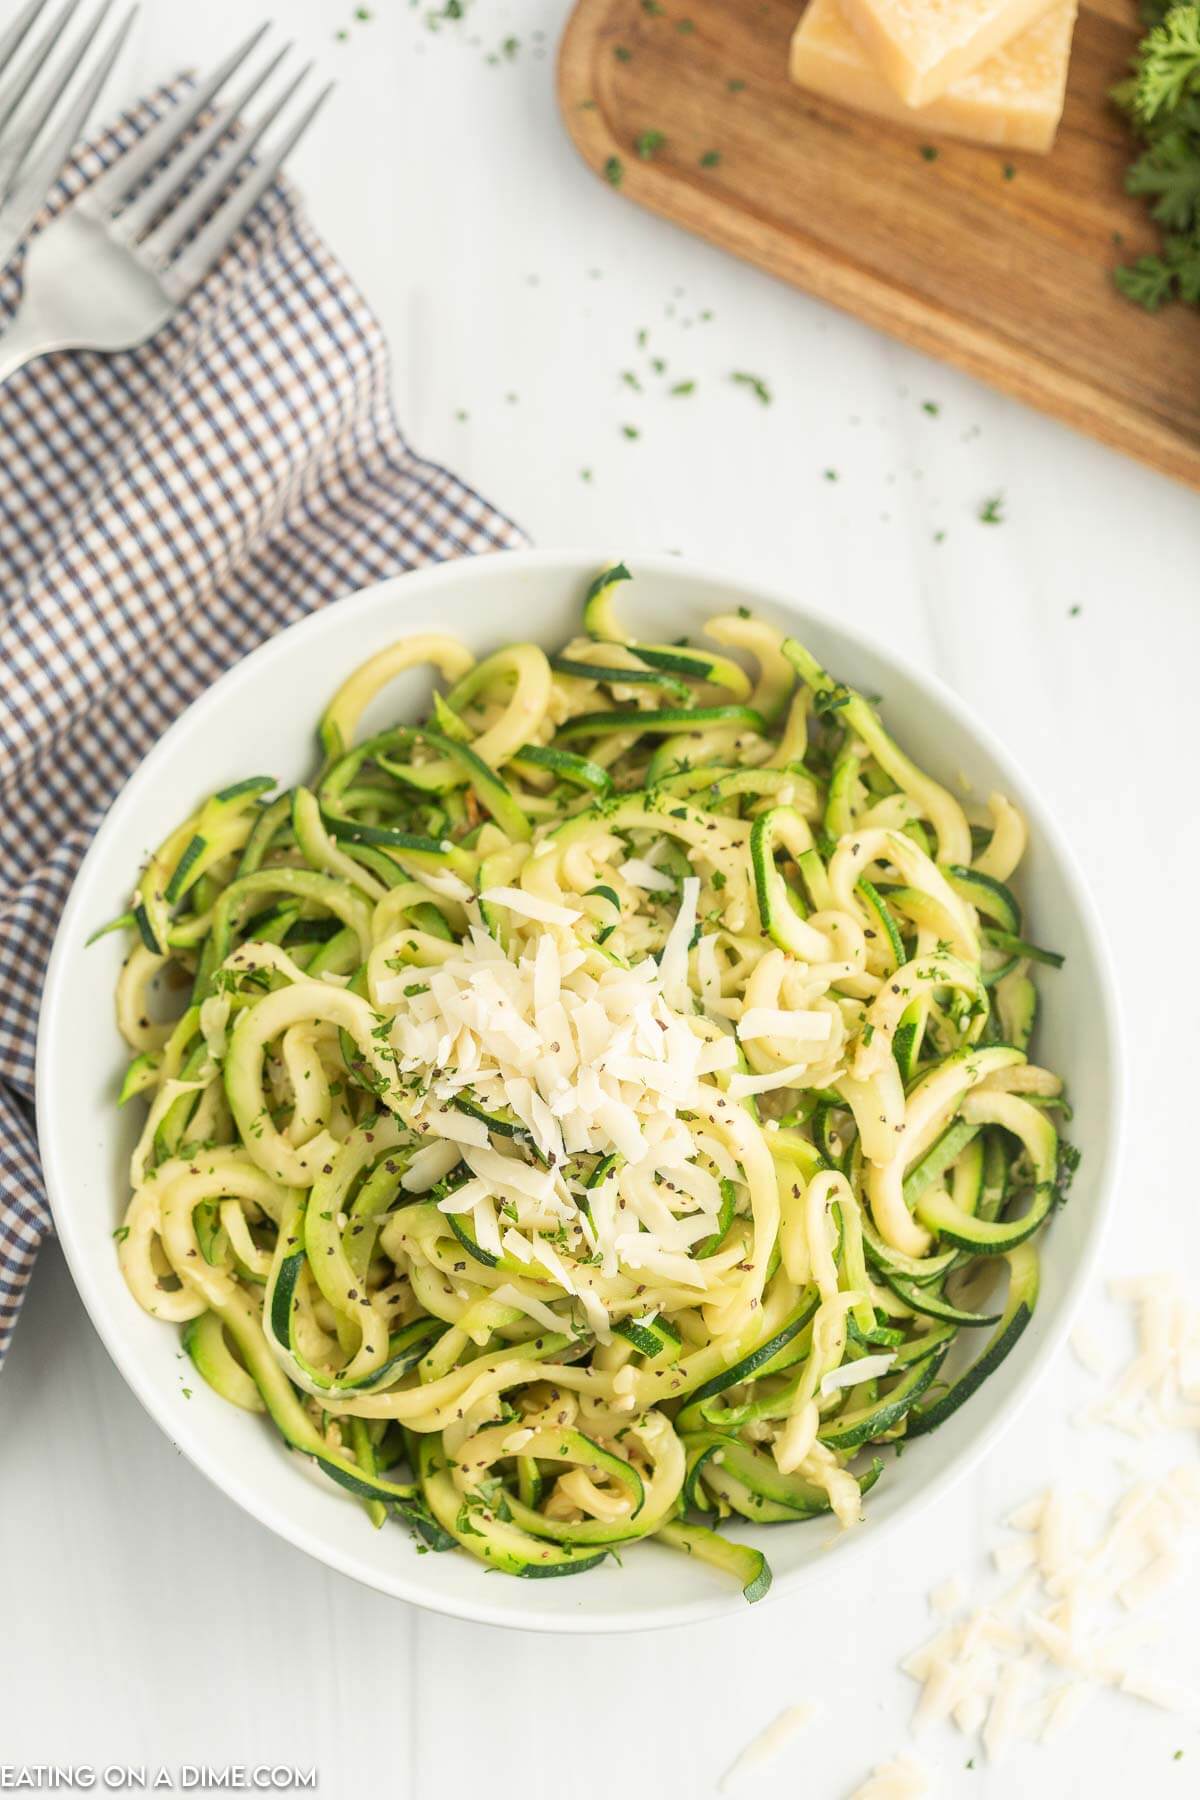 How to Make and Cook Zucchini Noodles - Everything You Need to Know!